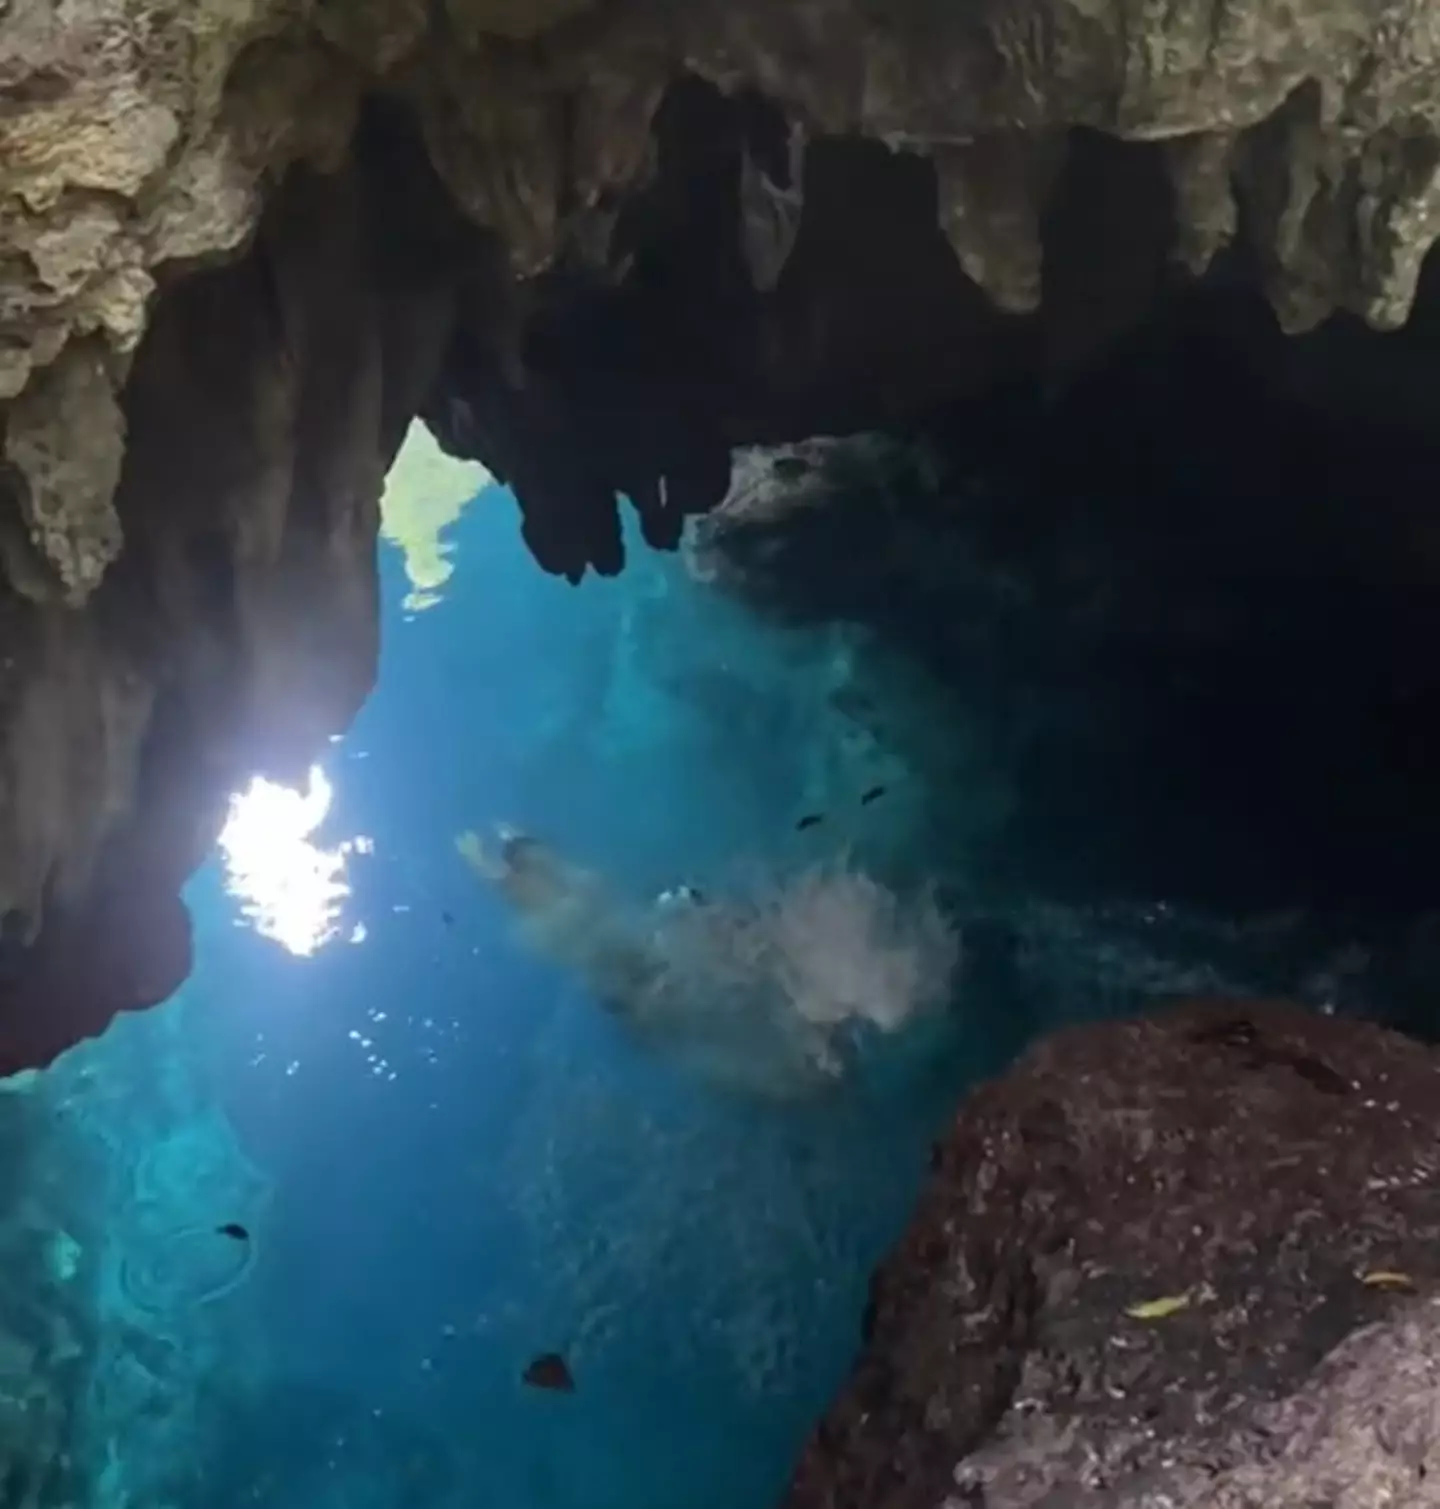 Look at that cave pool, where else in the world are you going to find that?